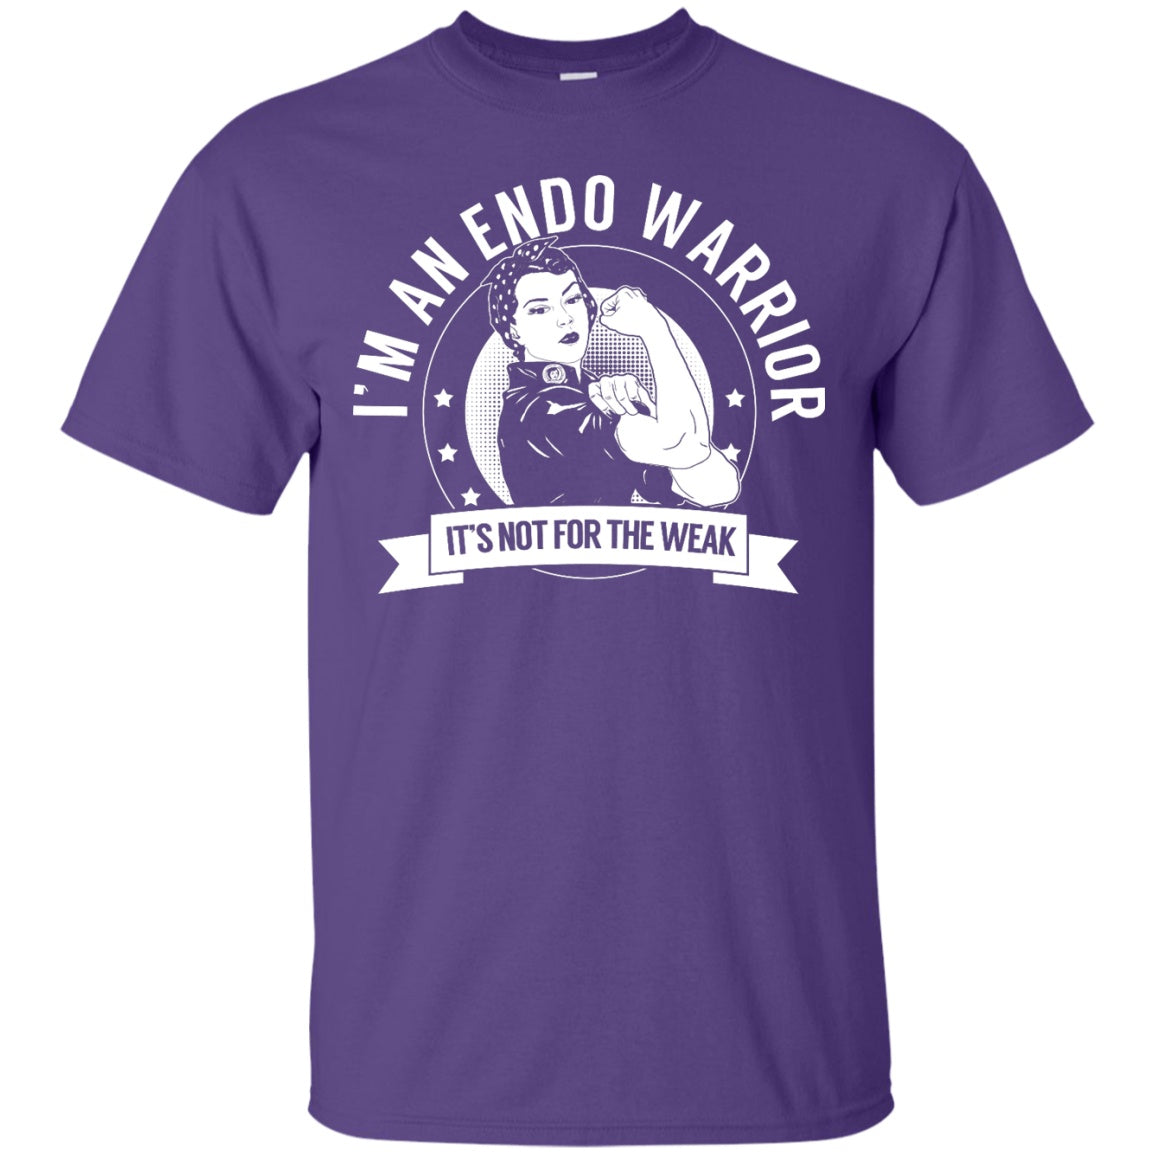 Endometriosis - Endo Warrior Not For The Weak Unisex Shirt - The Unchargeables